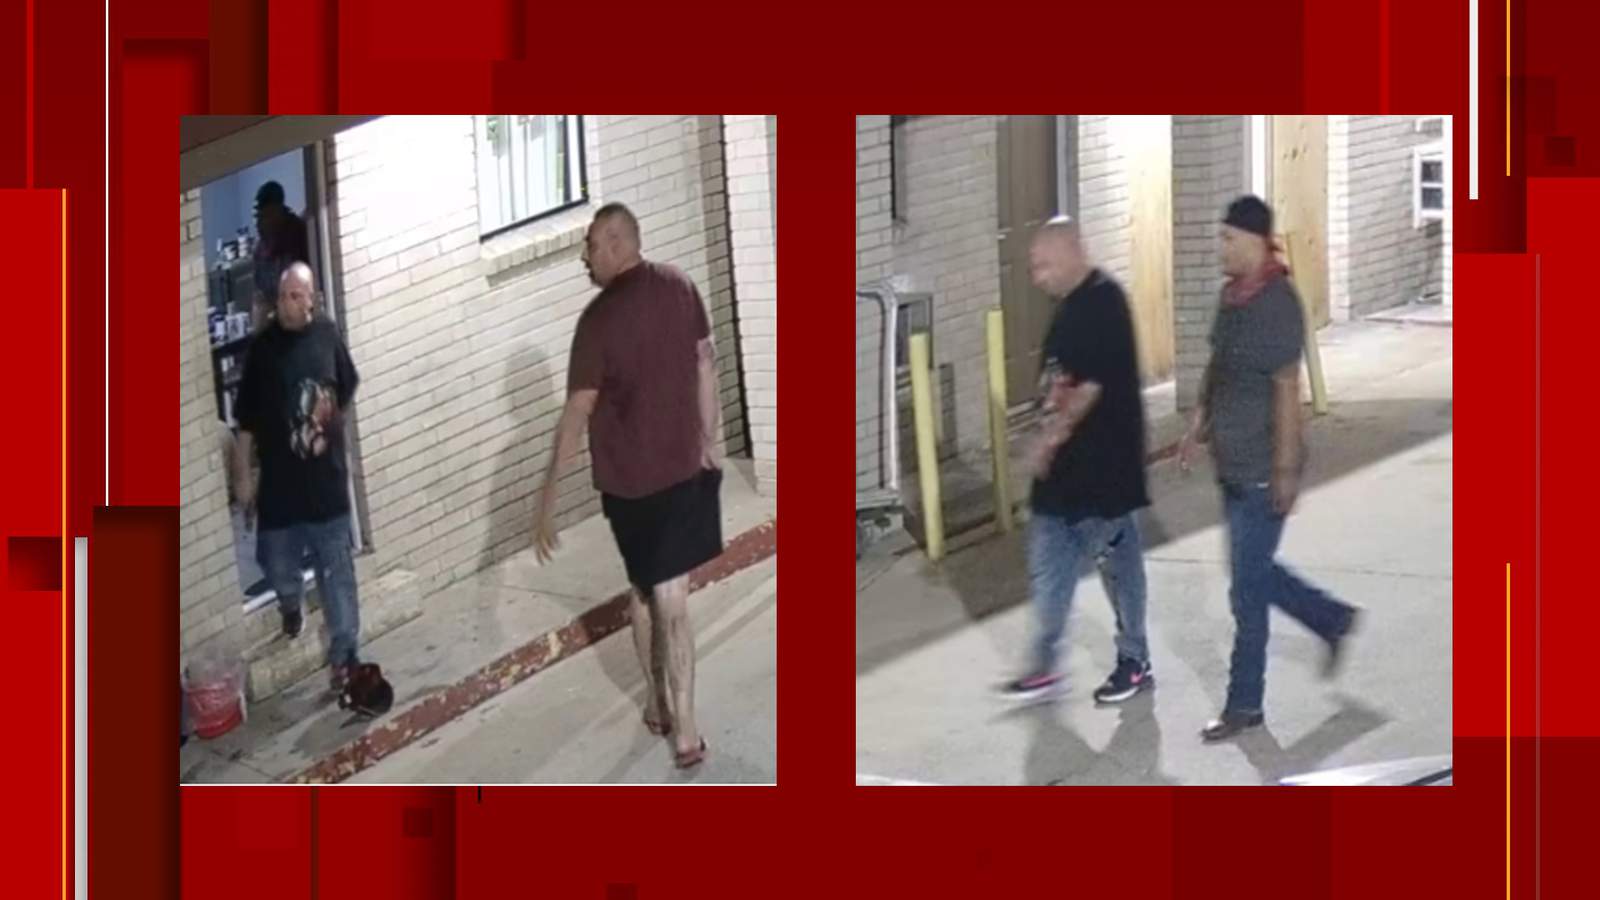 San Antonio police ask for public’s help in identifying persons of interest in South Side shooting